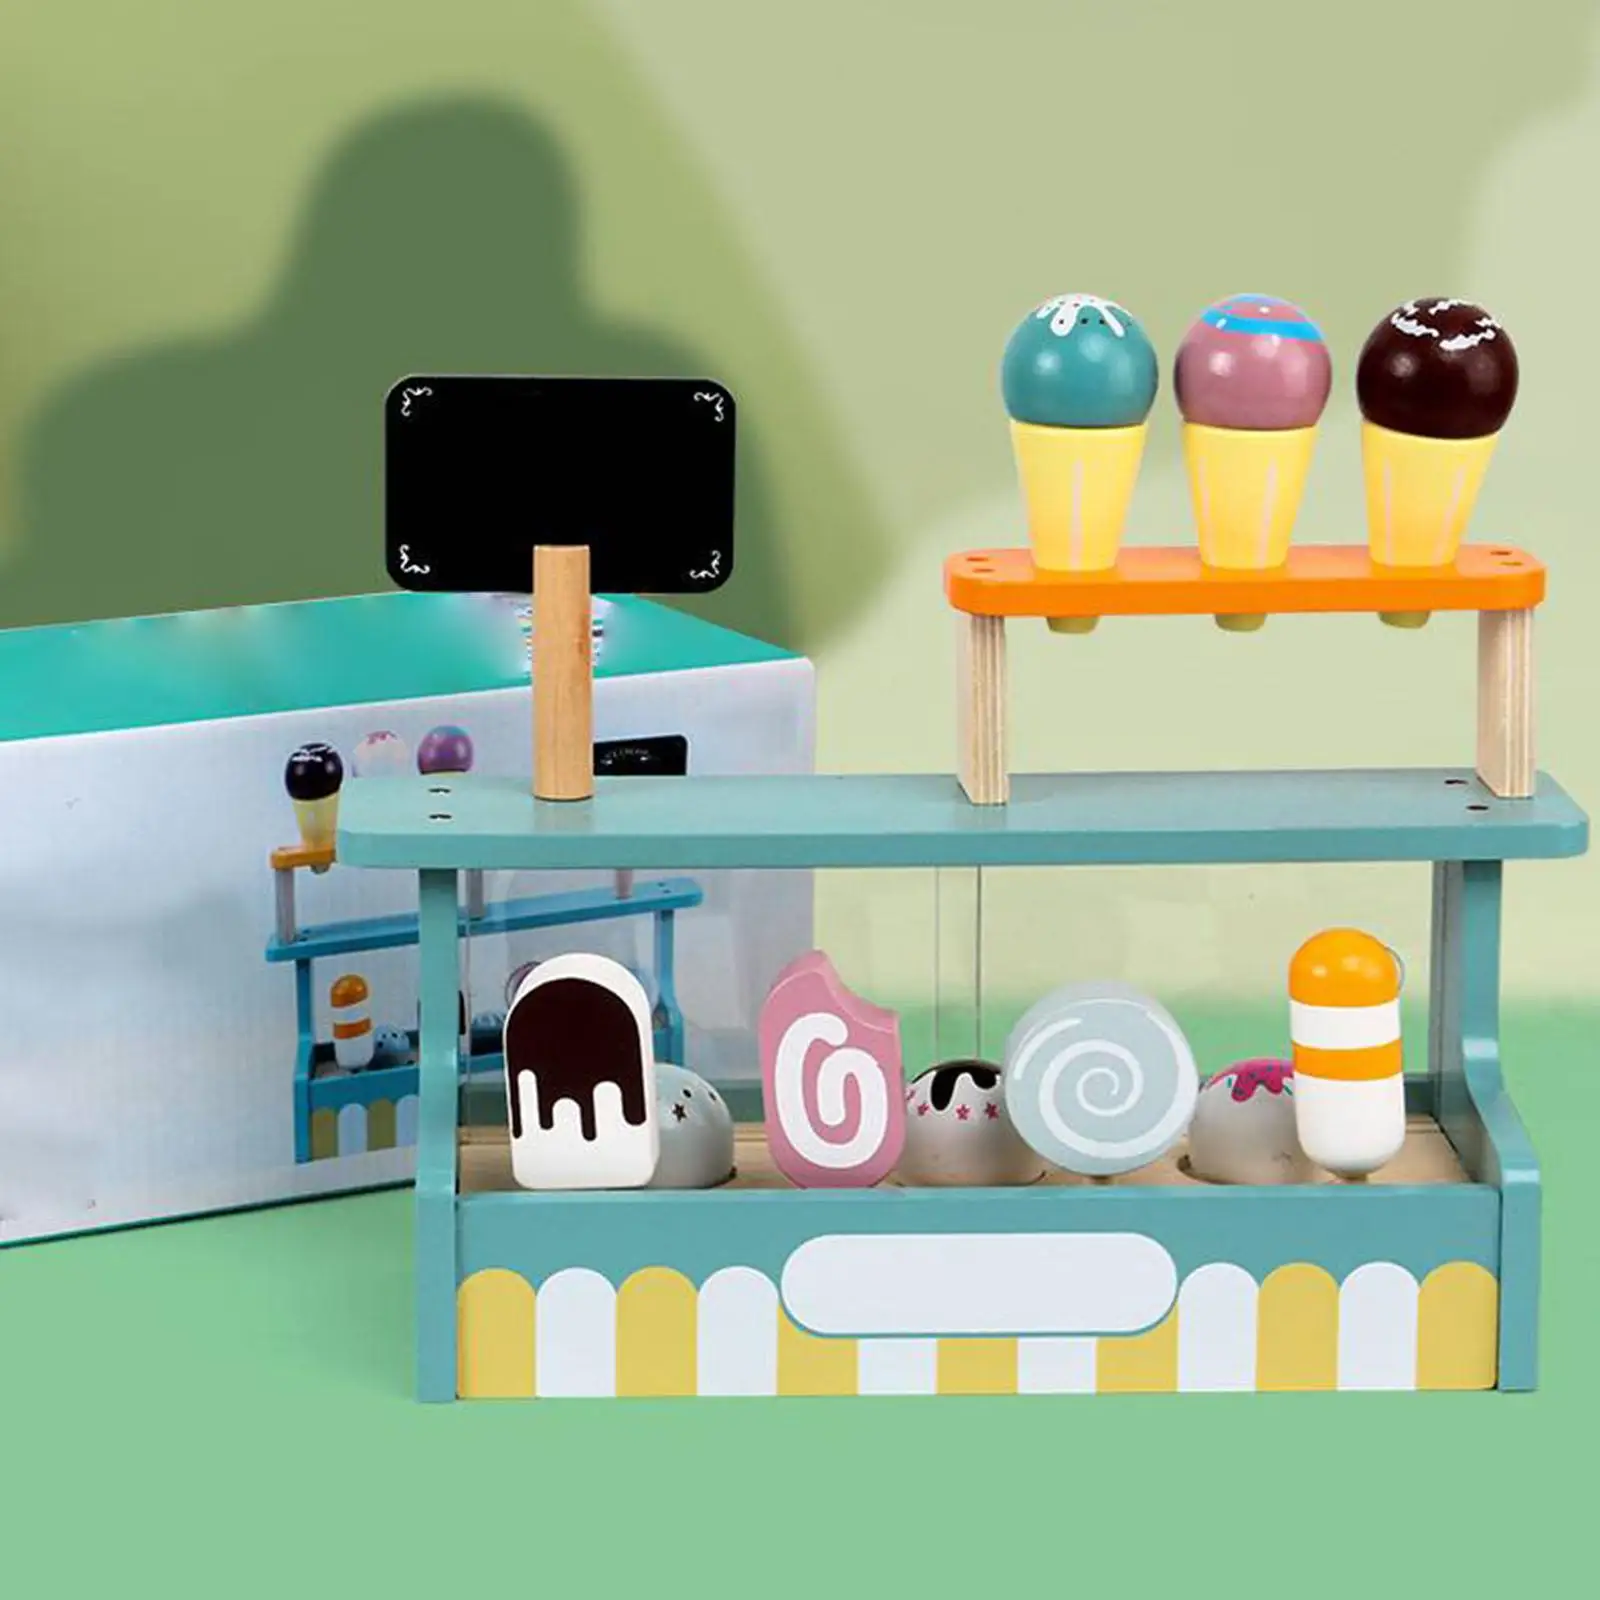 Educational food and Accessories for Interaction Birthday Gift Kitchen Cooking